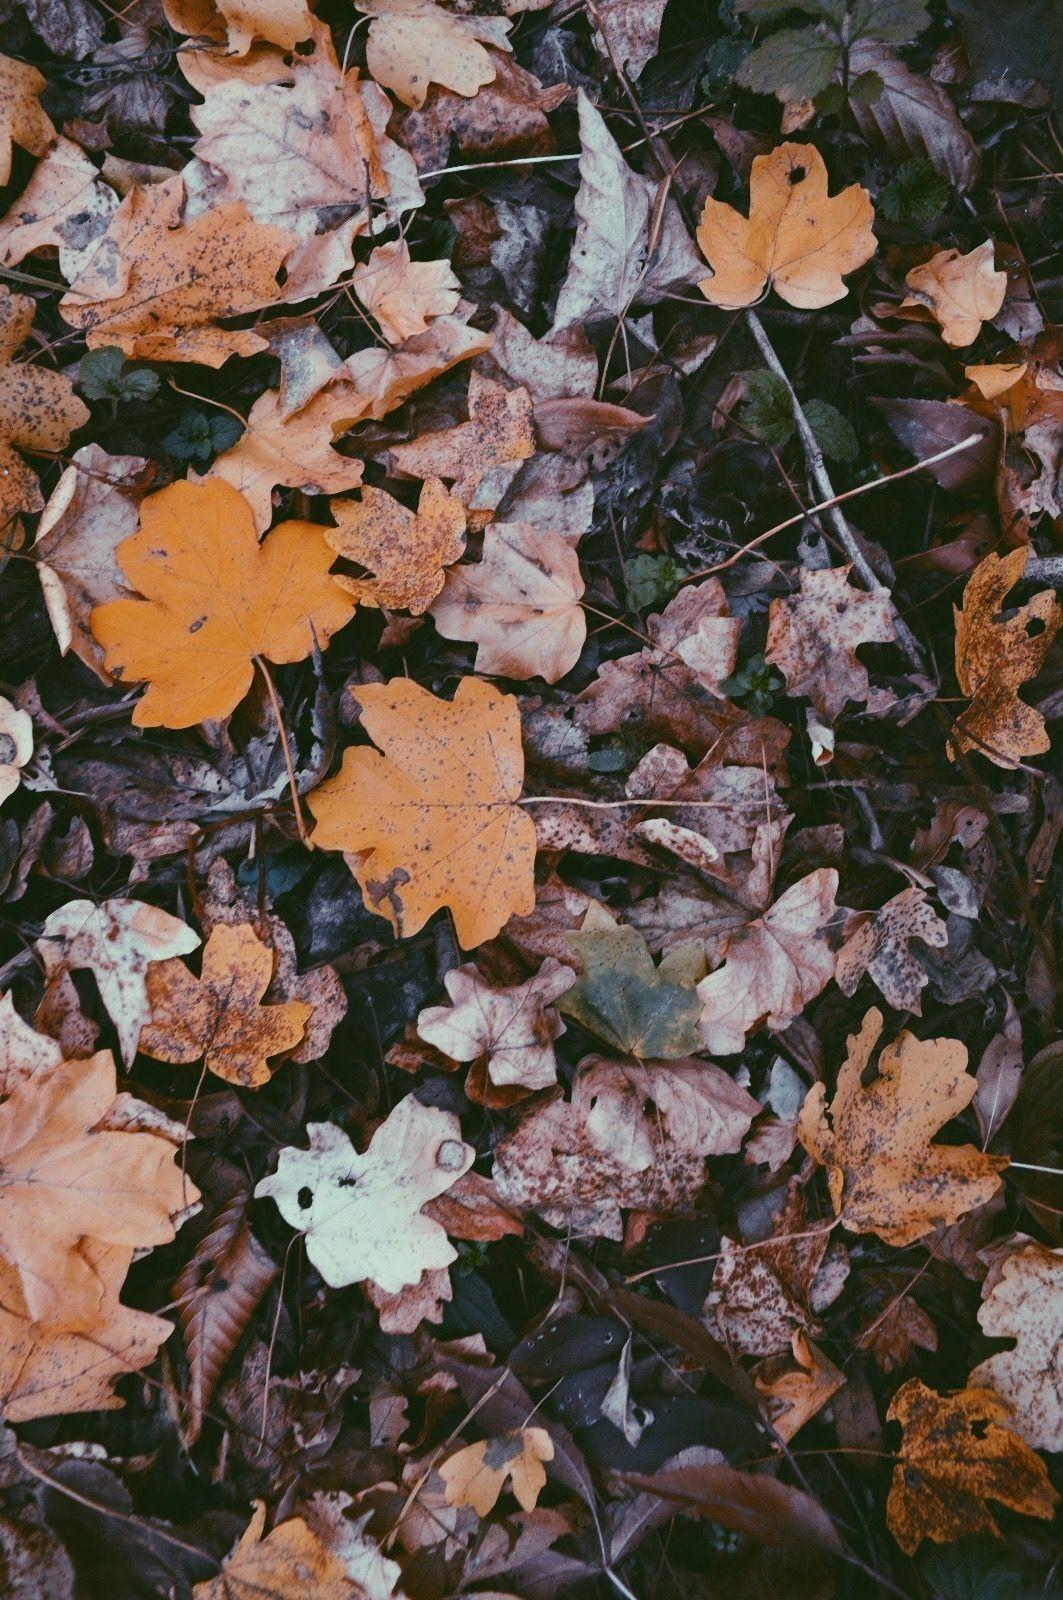 A close up of some leaves on the ground - Leaves, vintage fall